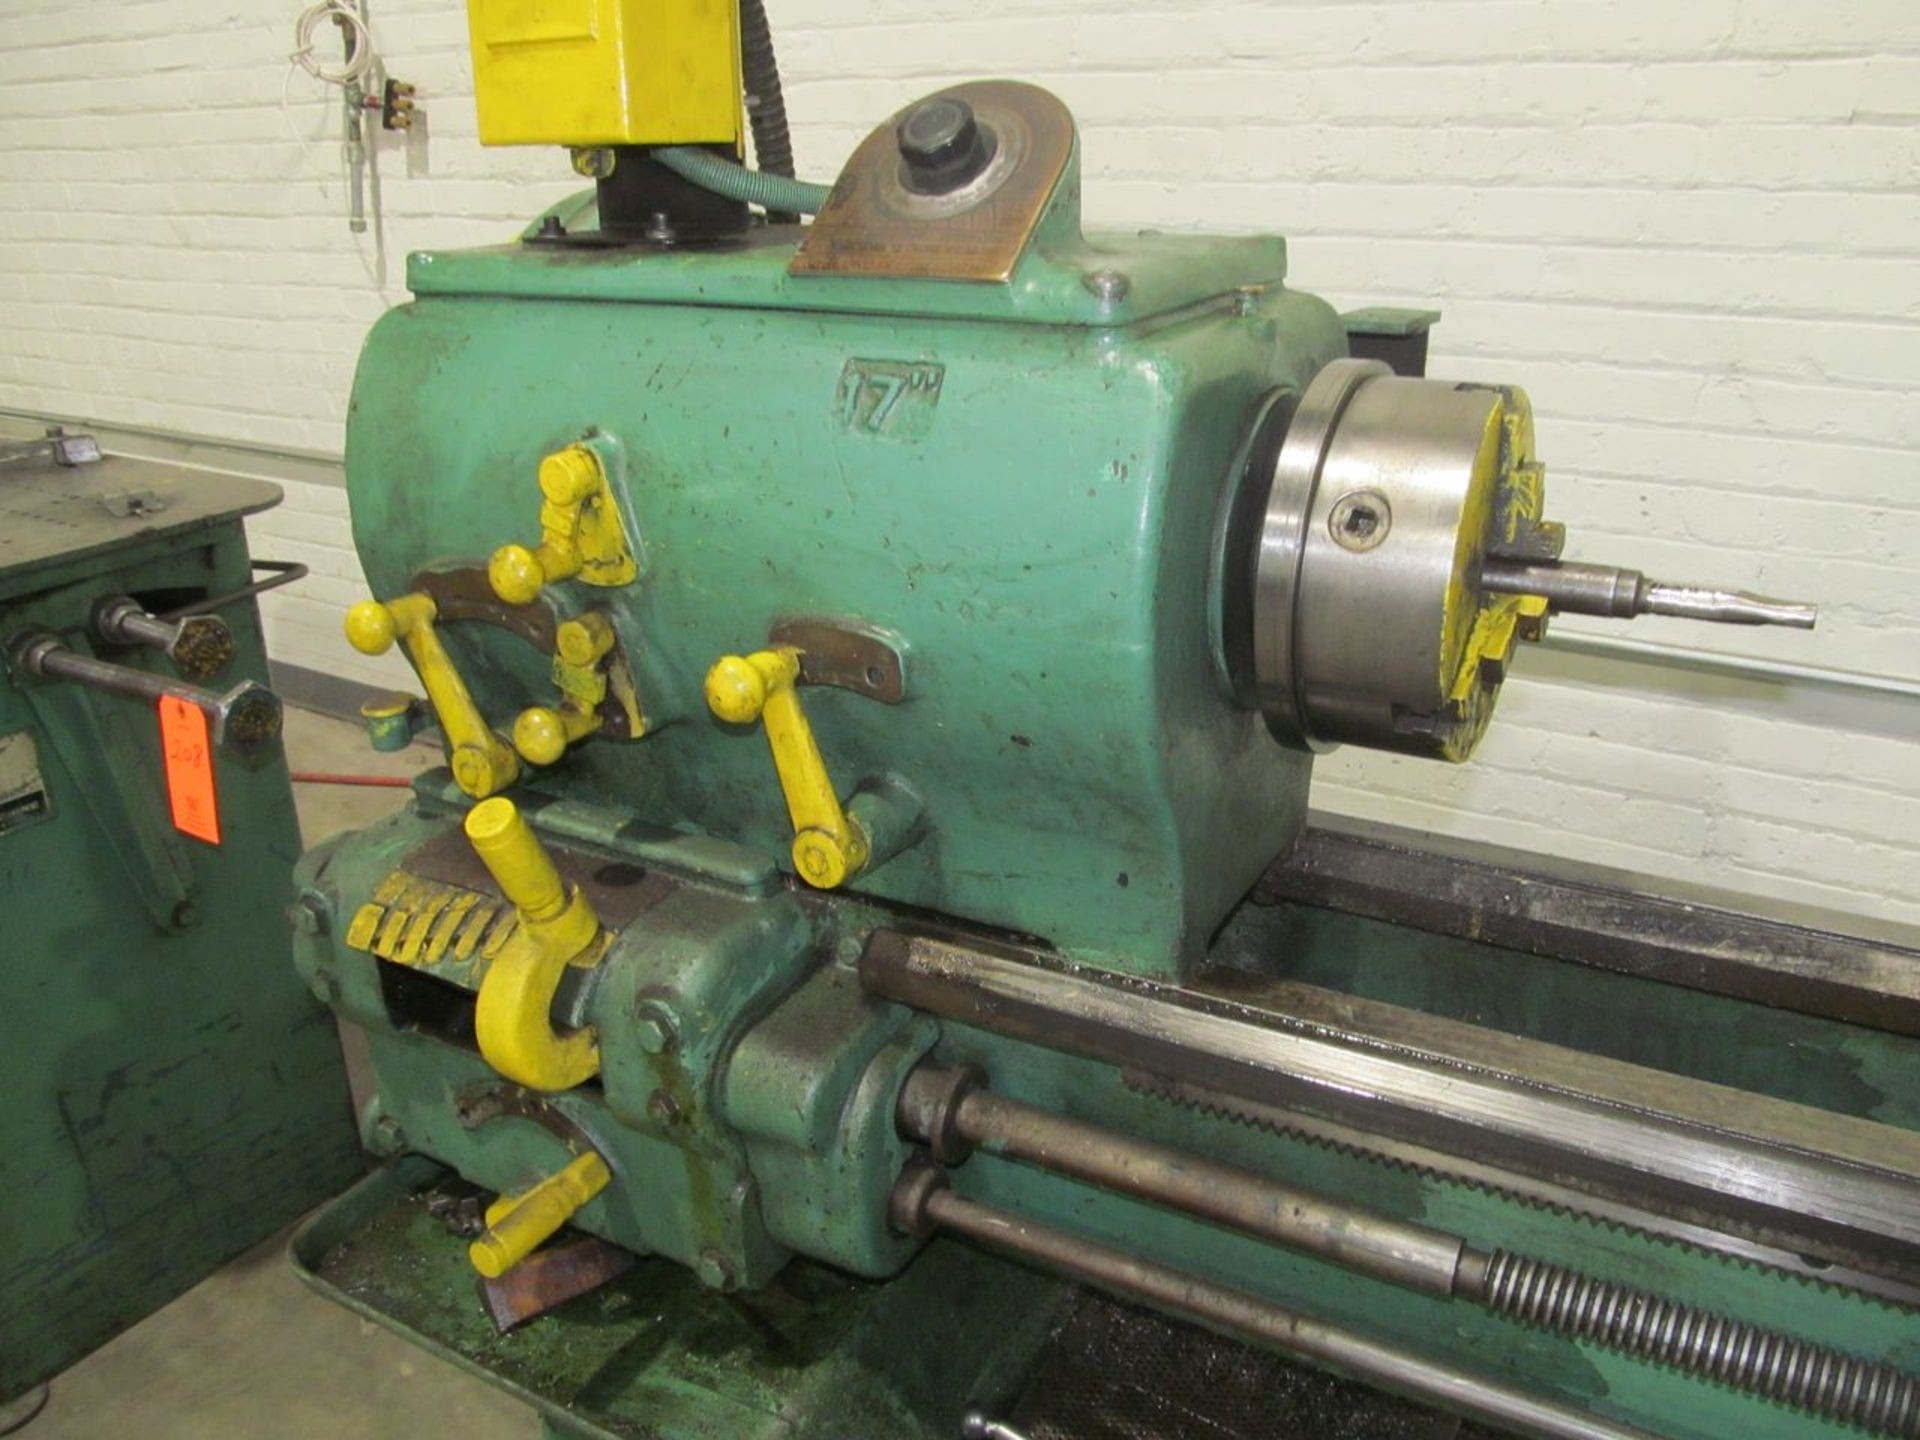 LeBlond Regal 17 in. x 30 in. (approx.) Tool Room Lathe; with 8 in. 3-Jaw Chuck, 1-1/2 in. Hole Thru - Image 3 of 4